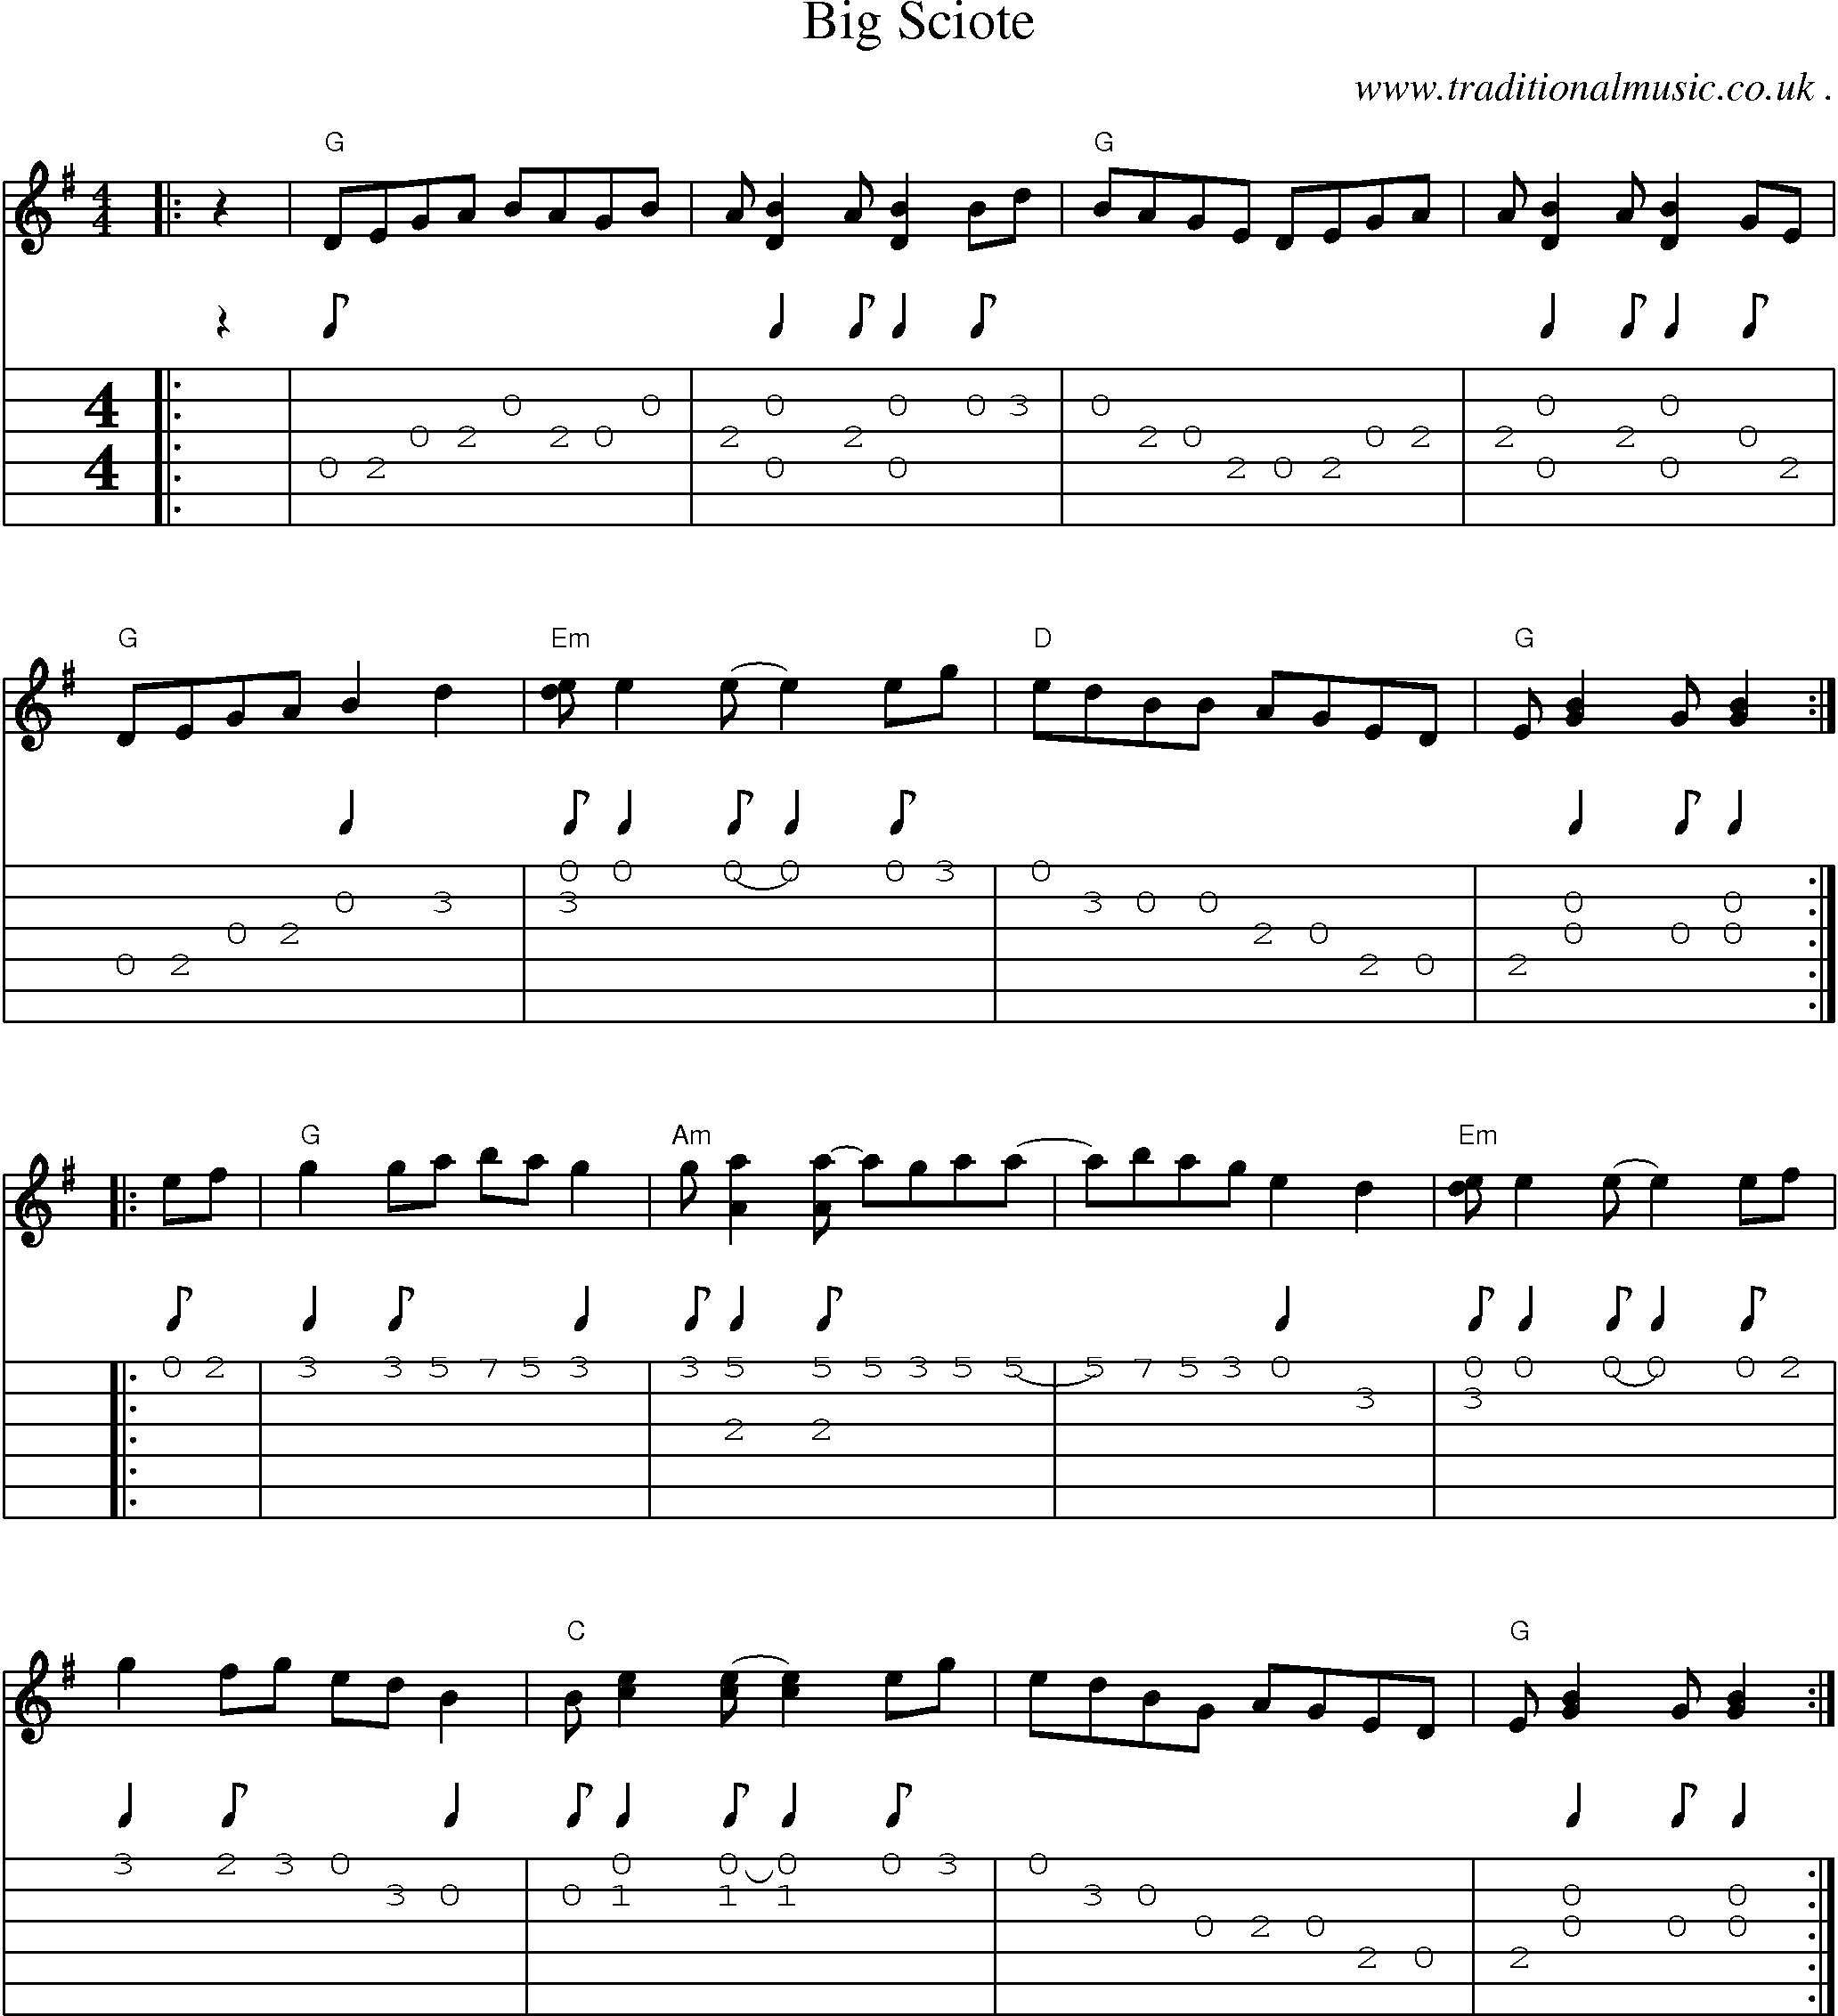 Music Score and Guitar Tabs for Big Sciote